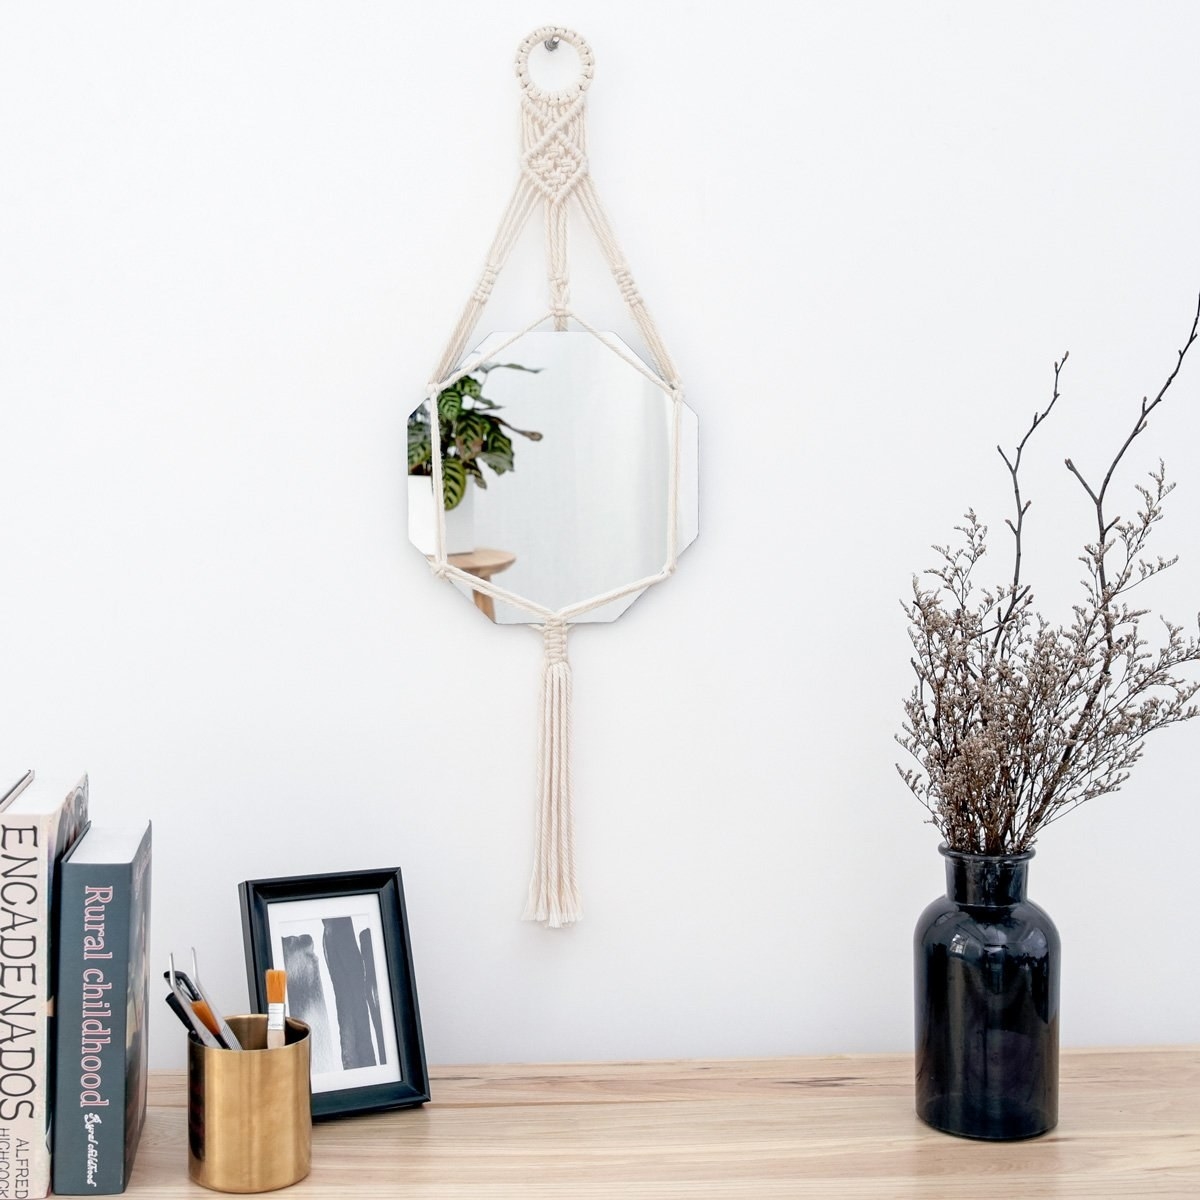 The macrame wall mirror hanging on a wall